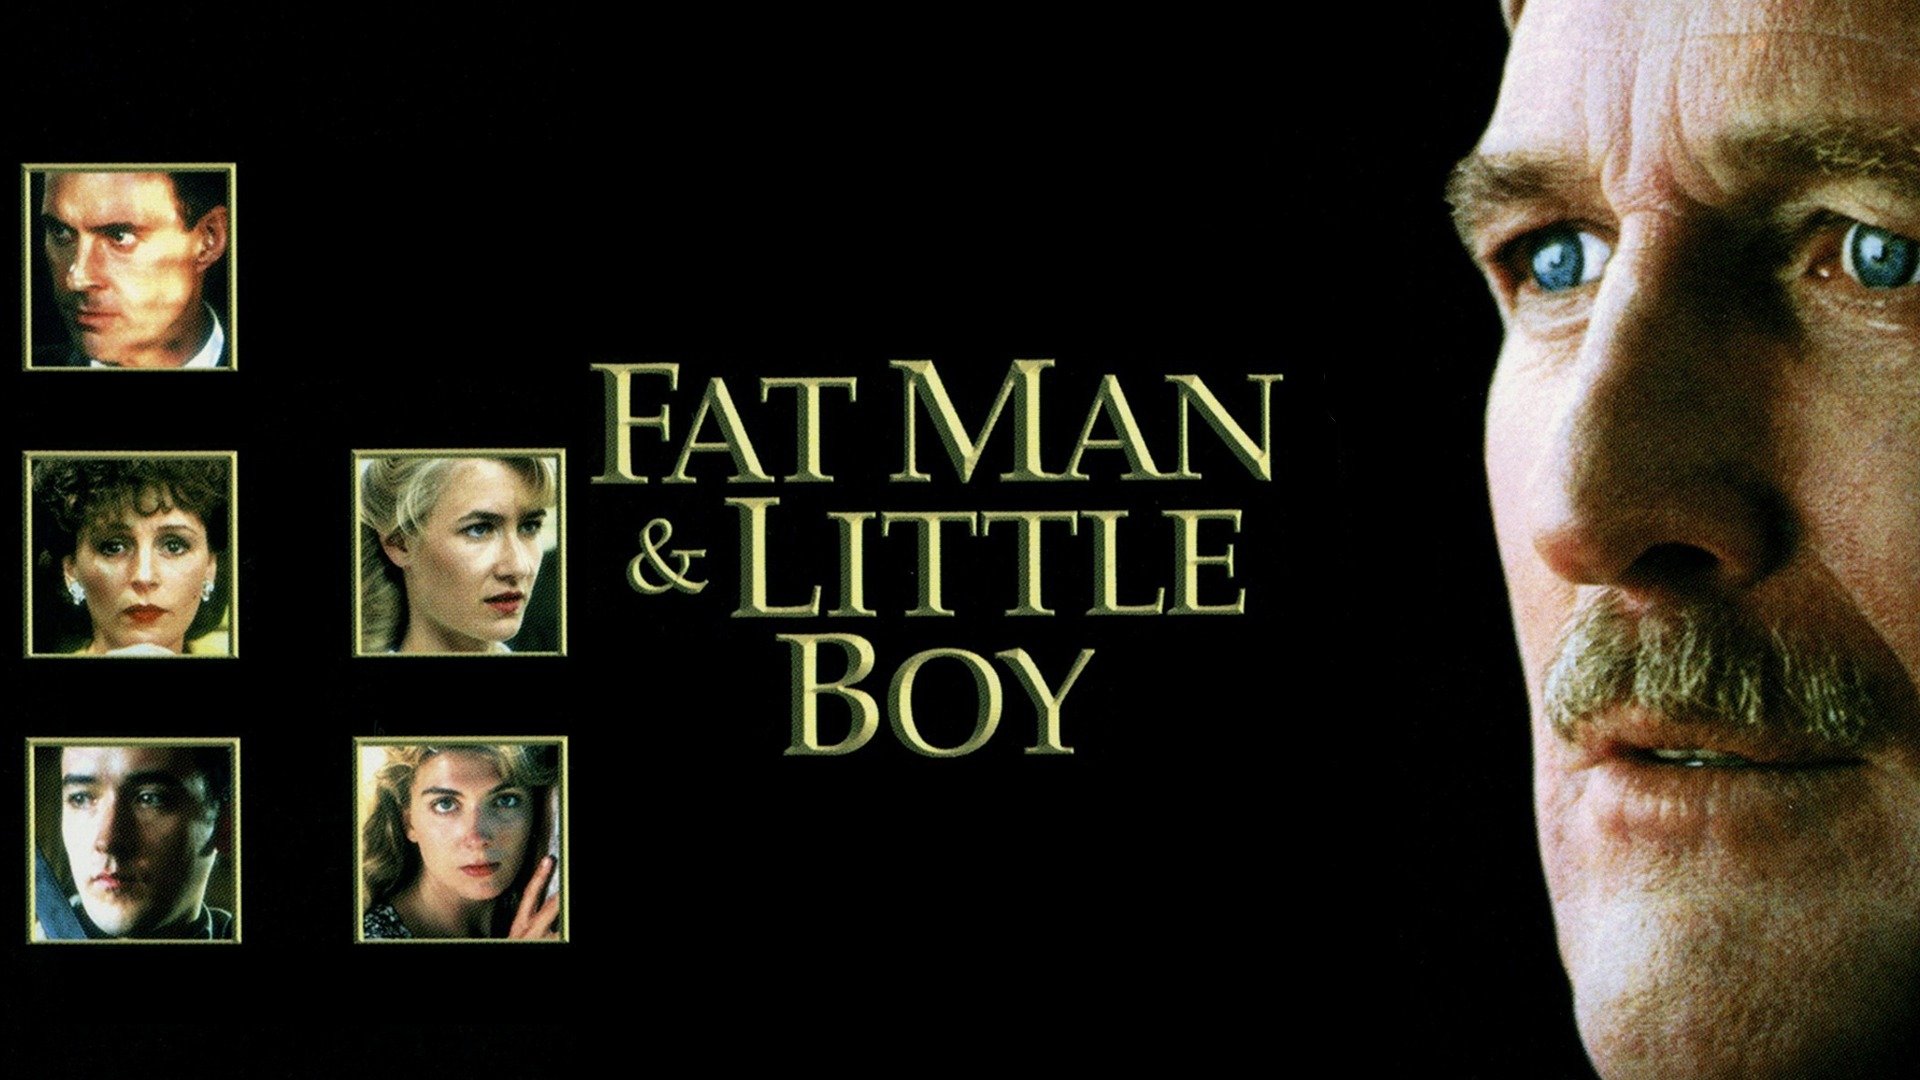 41-facts-about-the-movie-fat-man-little-boy